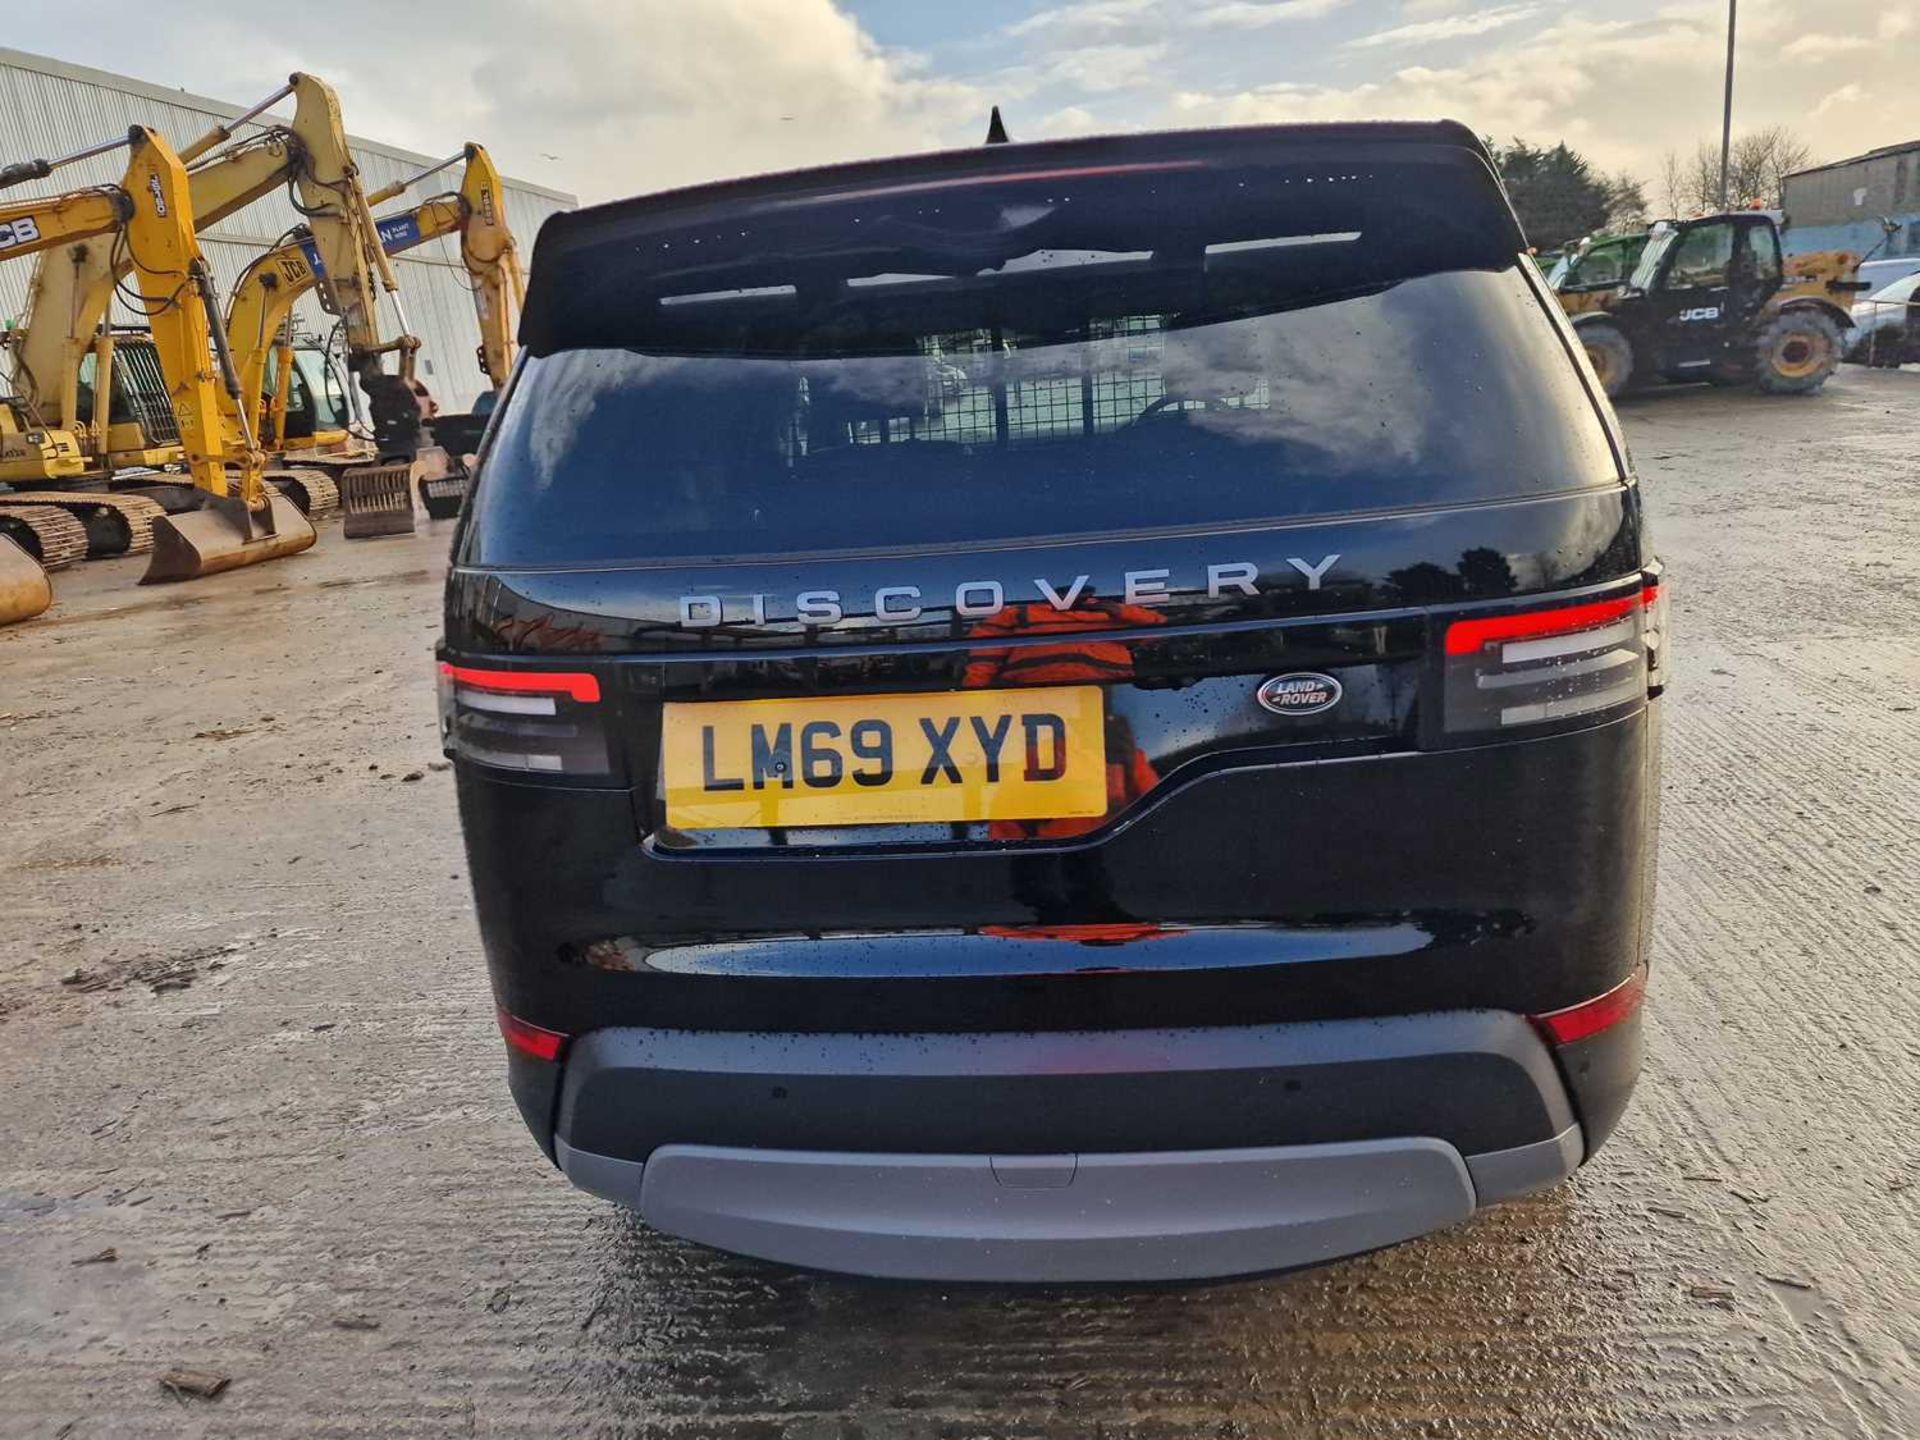 2019 Landrover Discovery SD4 SE 240 Commercial, Auto, Paddle Shift, Sat Nav, Reverse Camera, Parking - Image 4 of 26